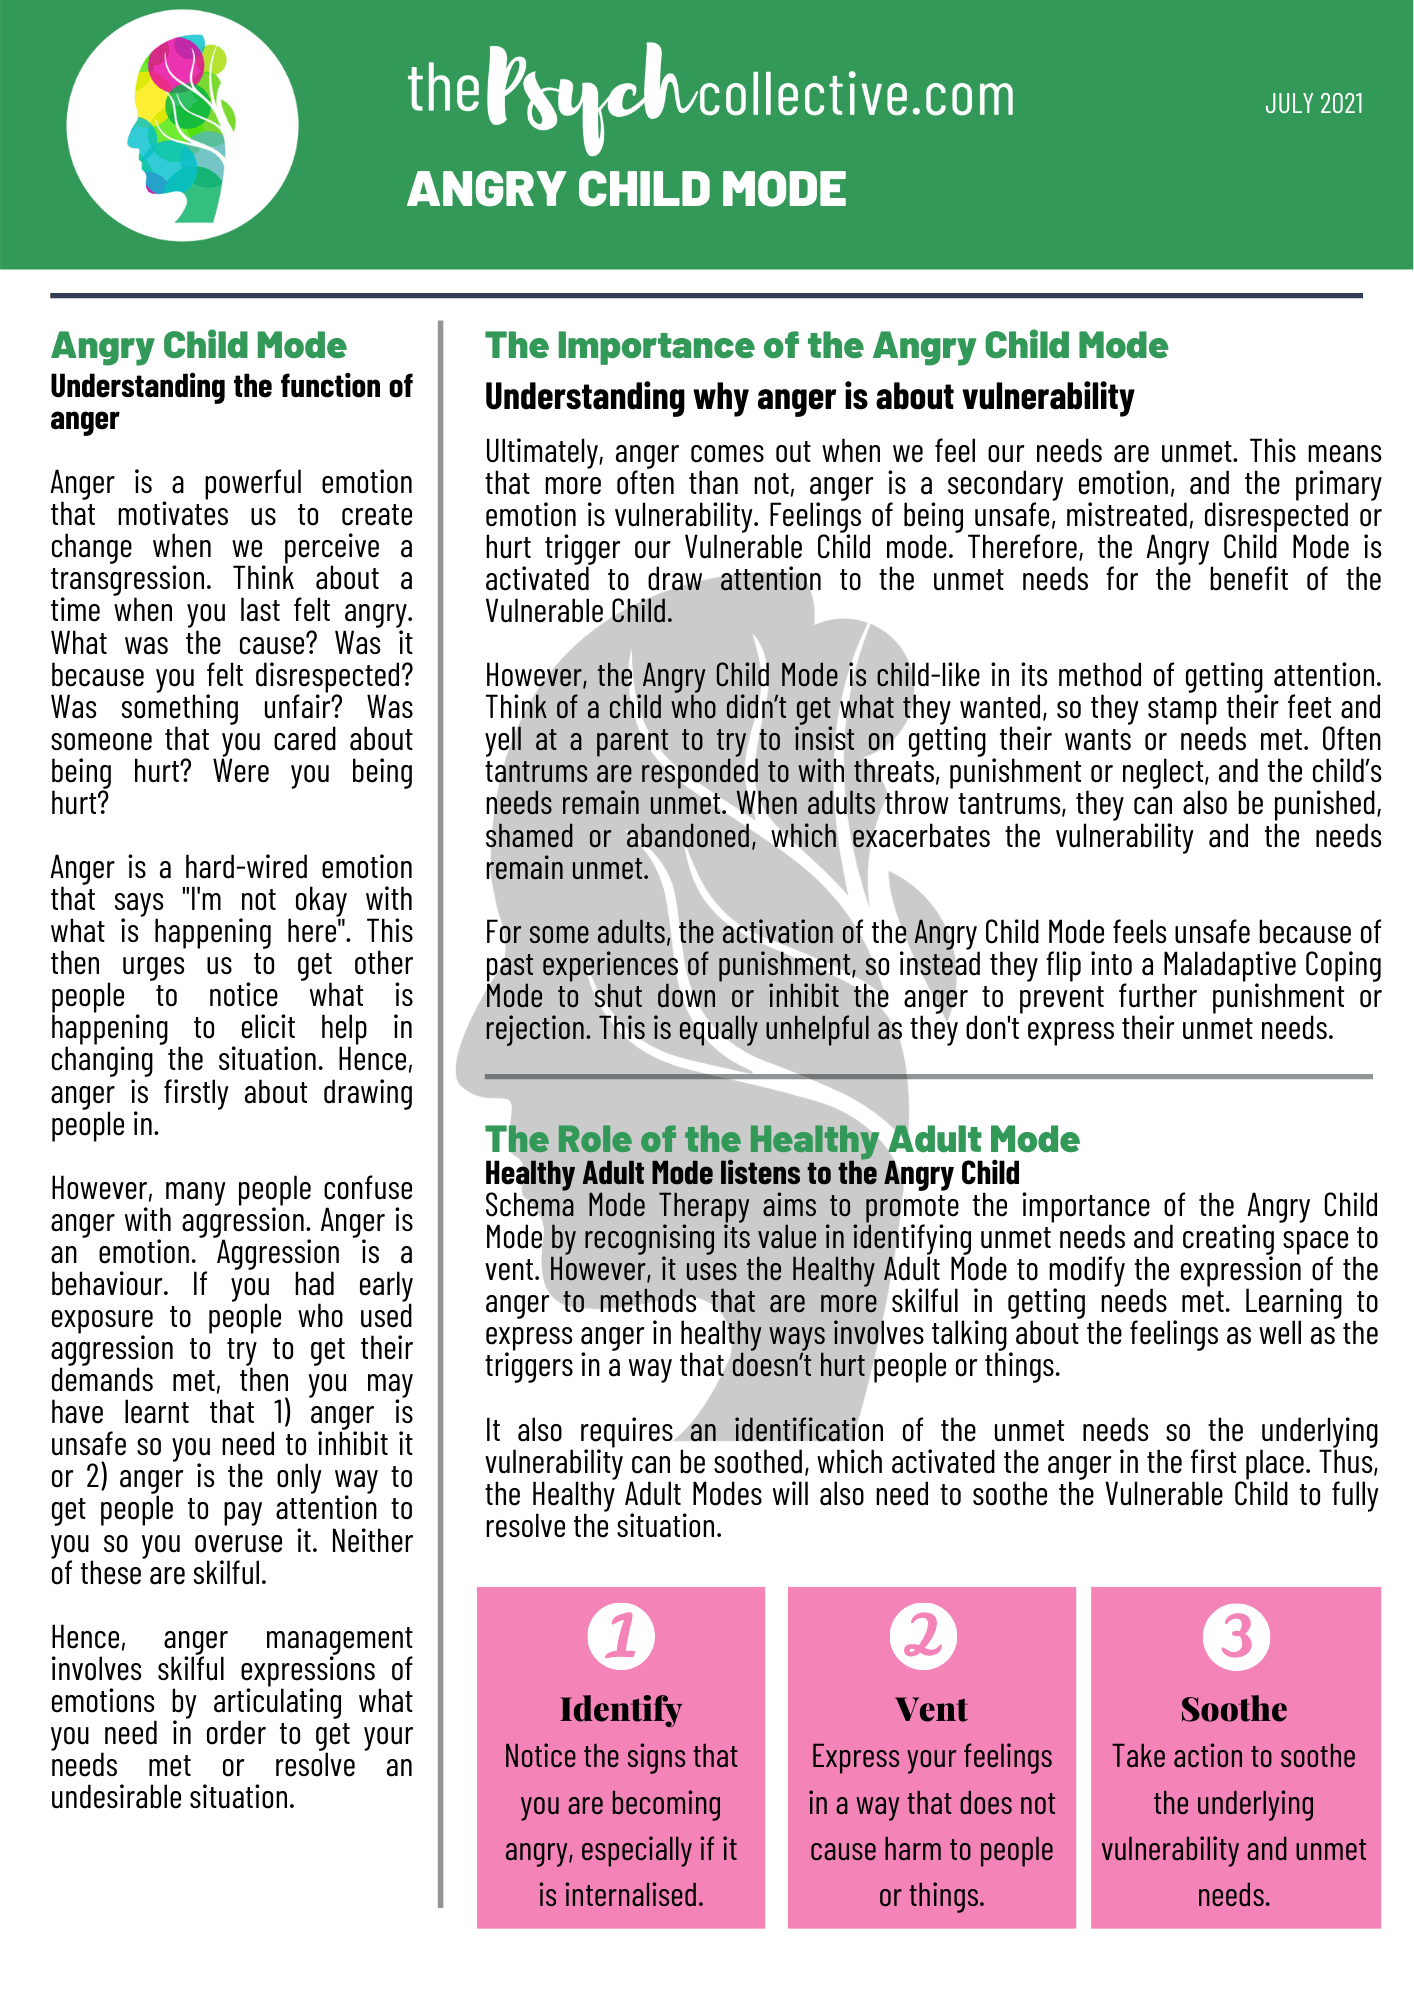 Angry Child Mode handout from The Psych Collective